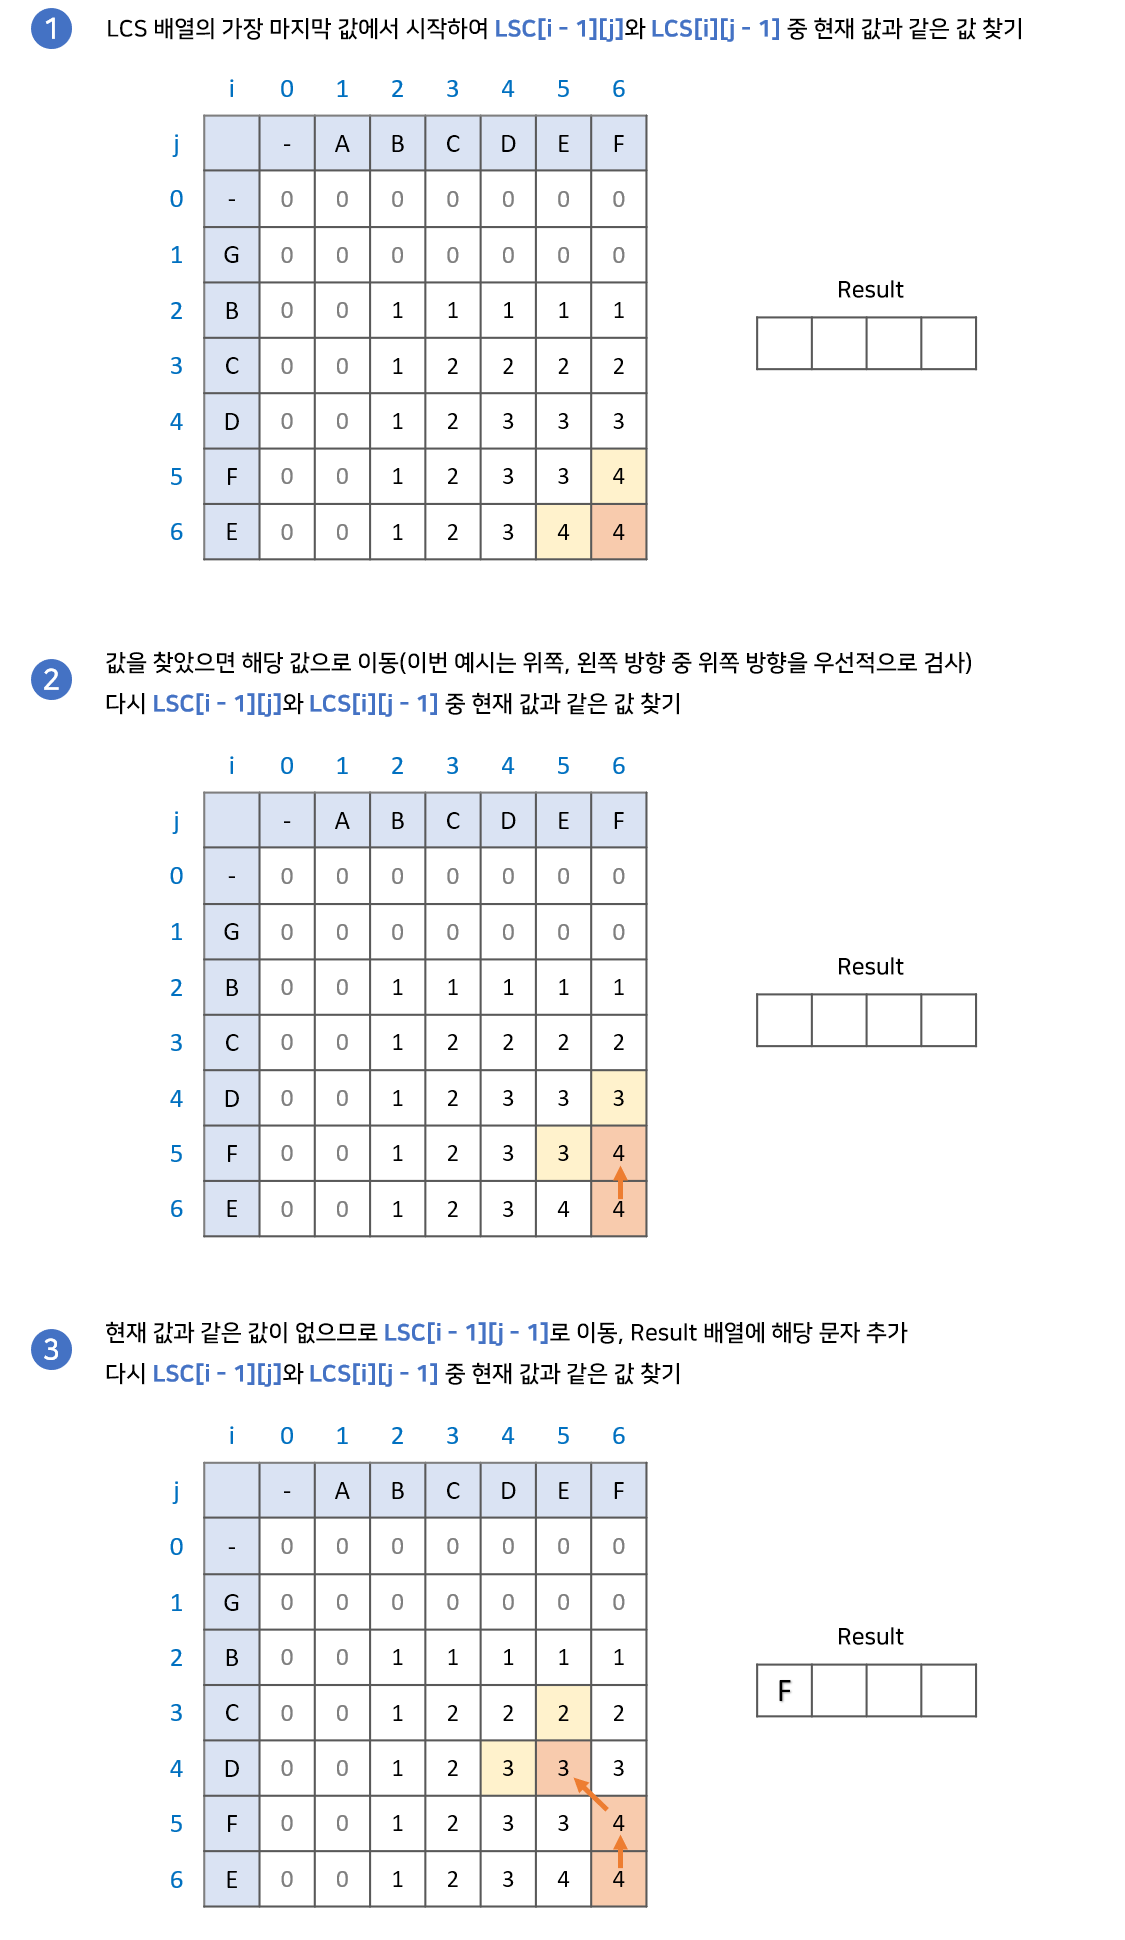 logest common subsequence 찾기 1